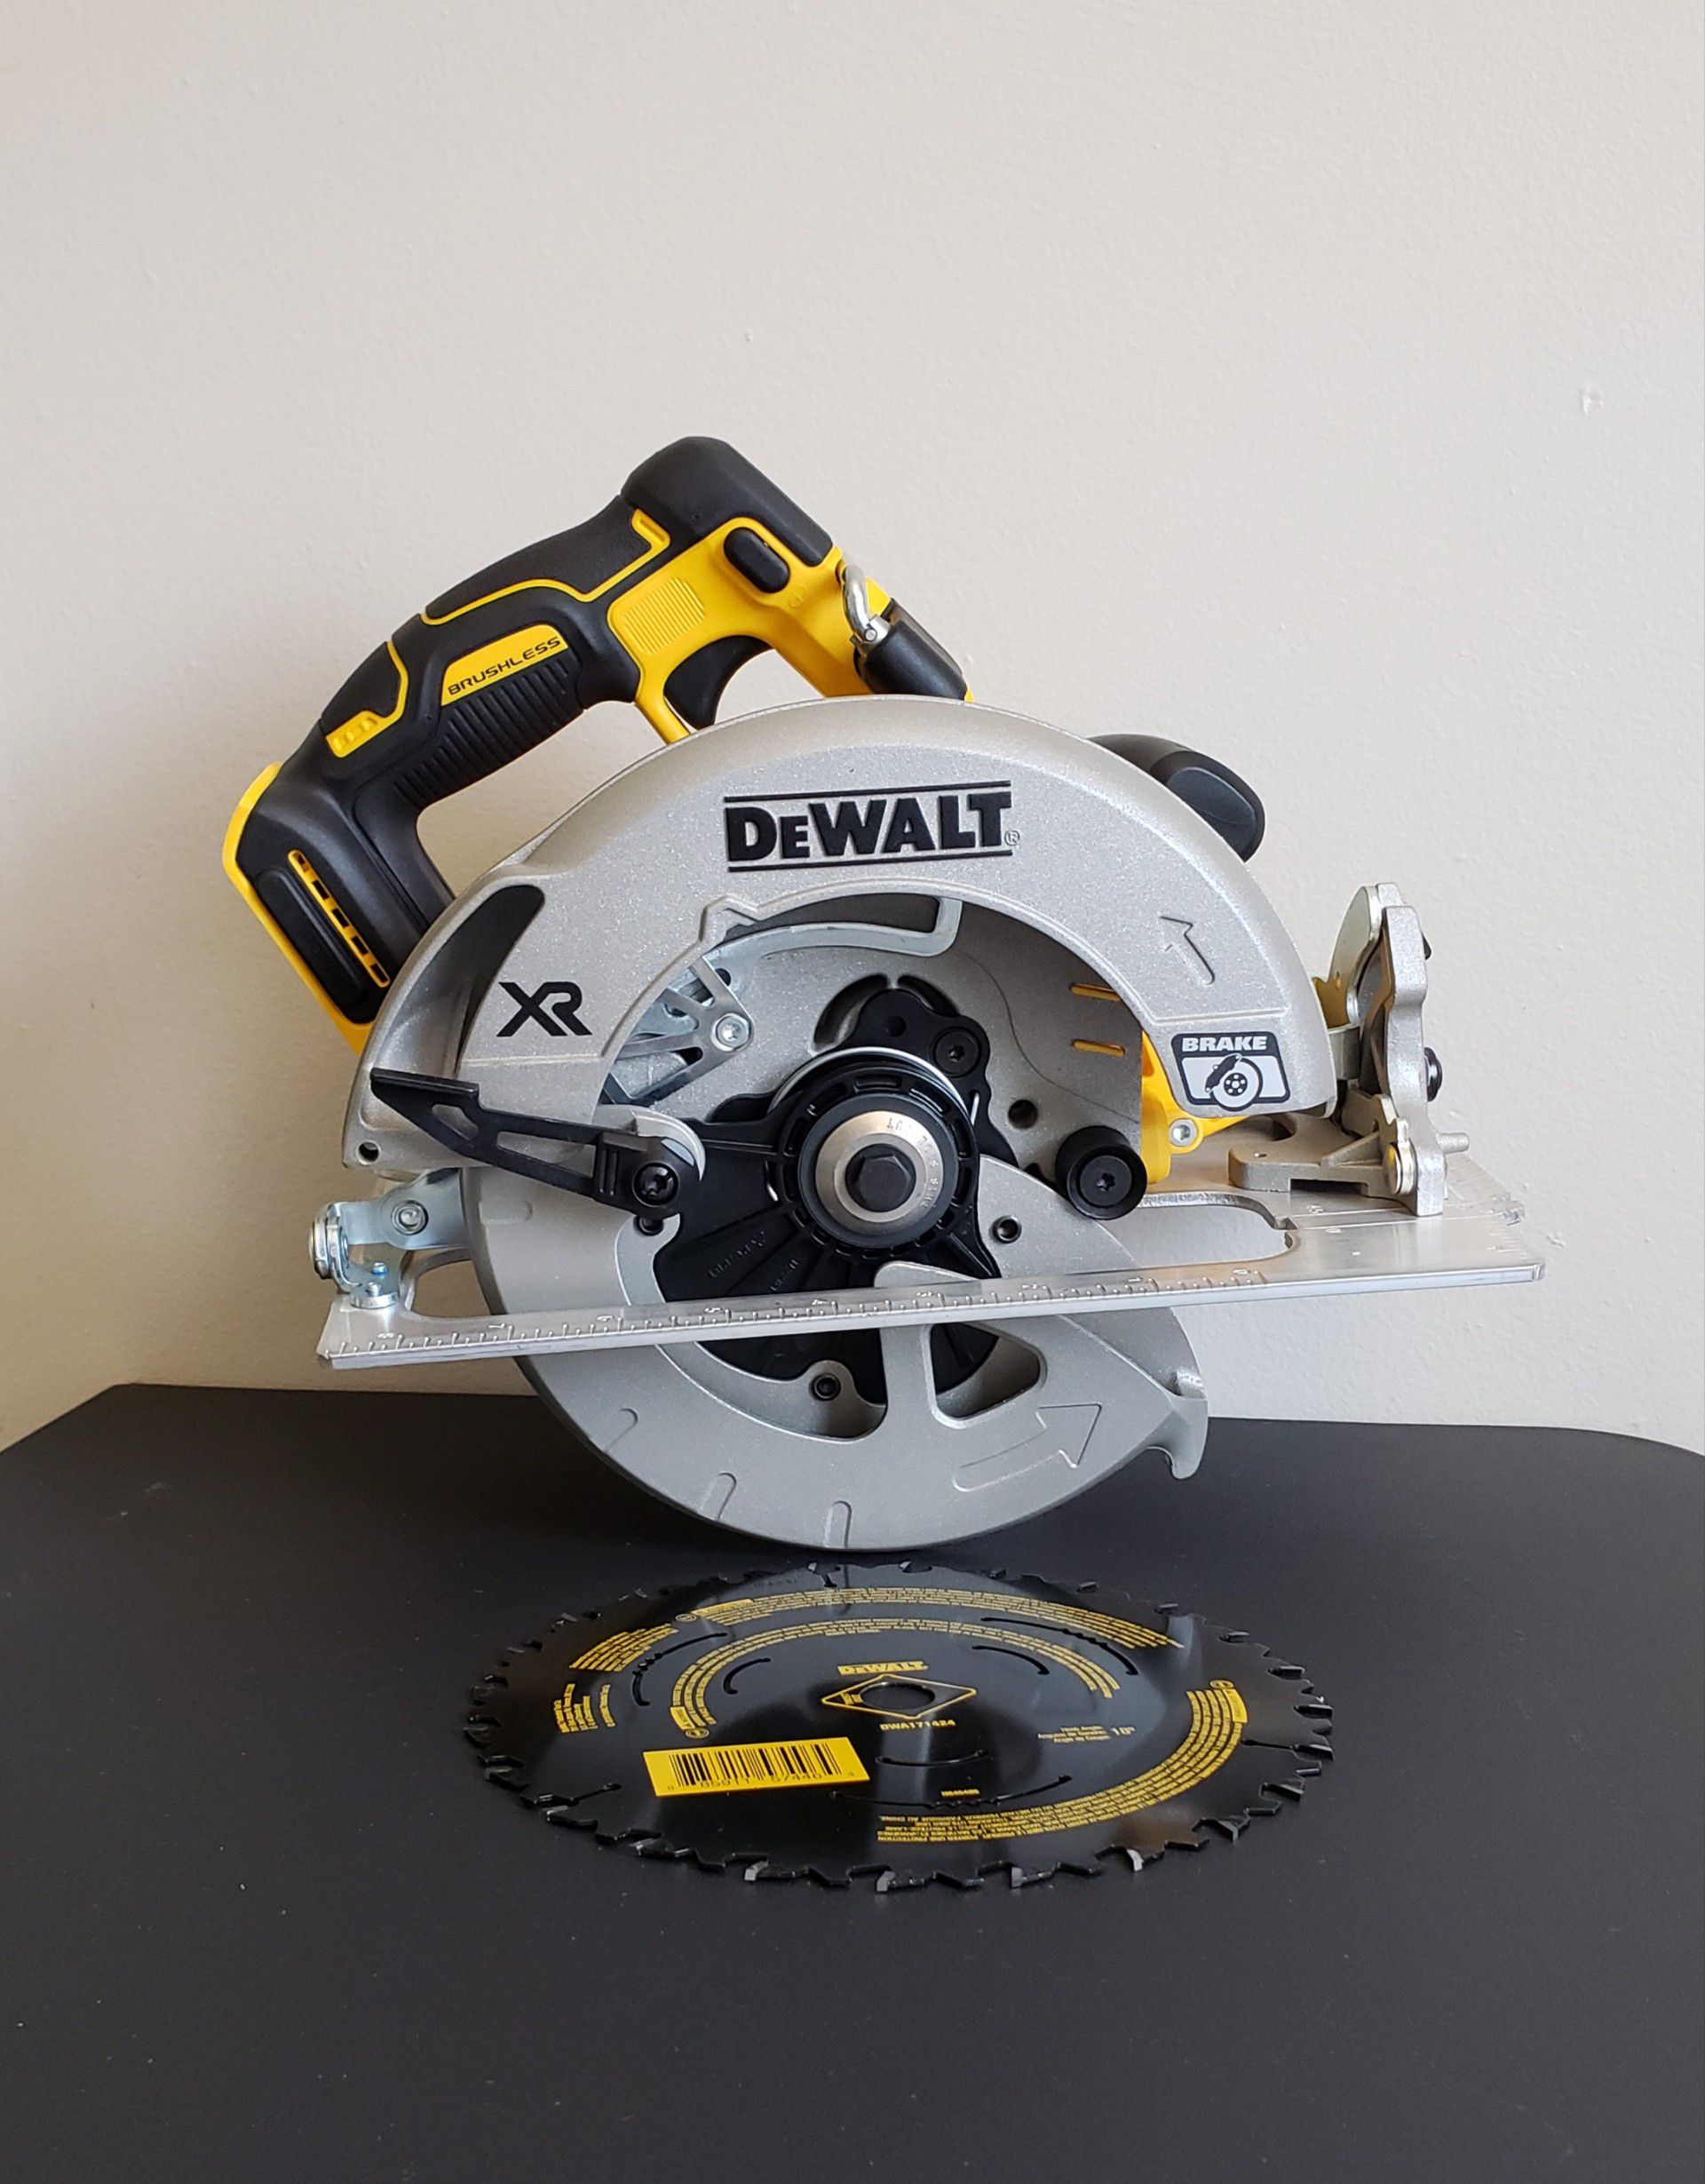 New Circular Saw Dewalt XR 7 1/4 ONLY TOOL NO CHARGER OR BATTERIES